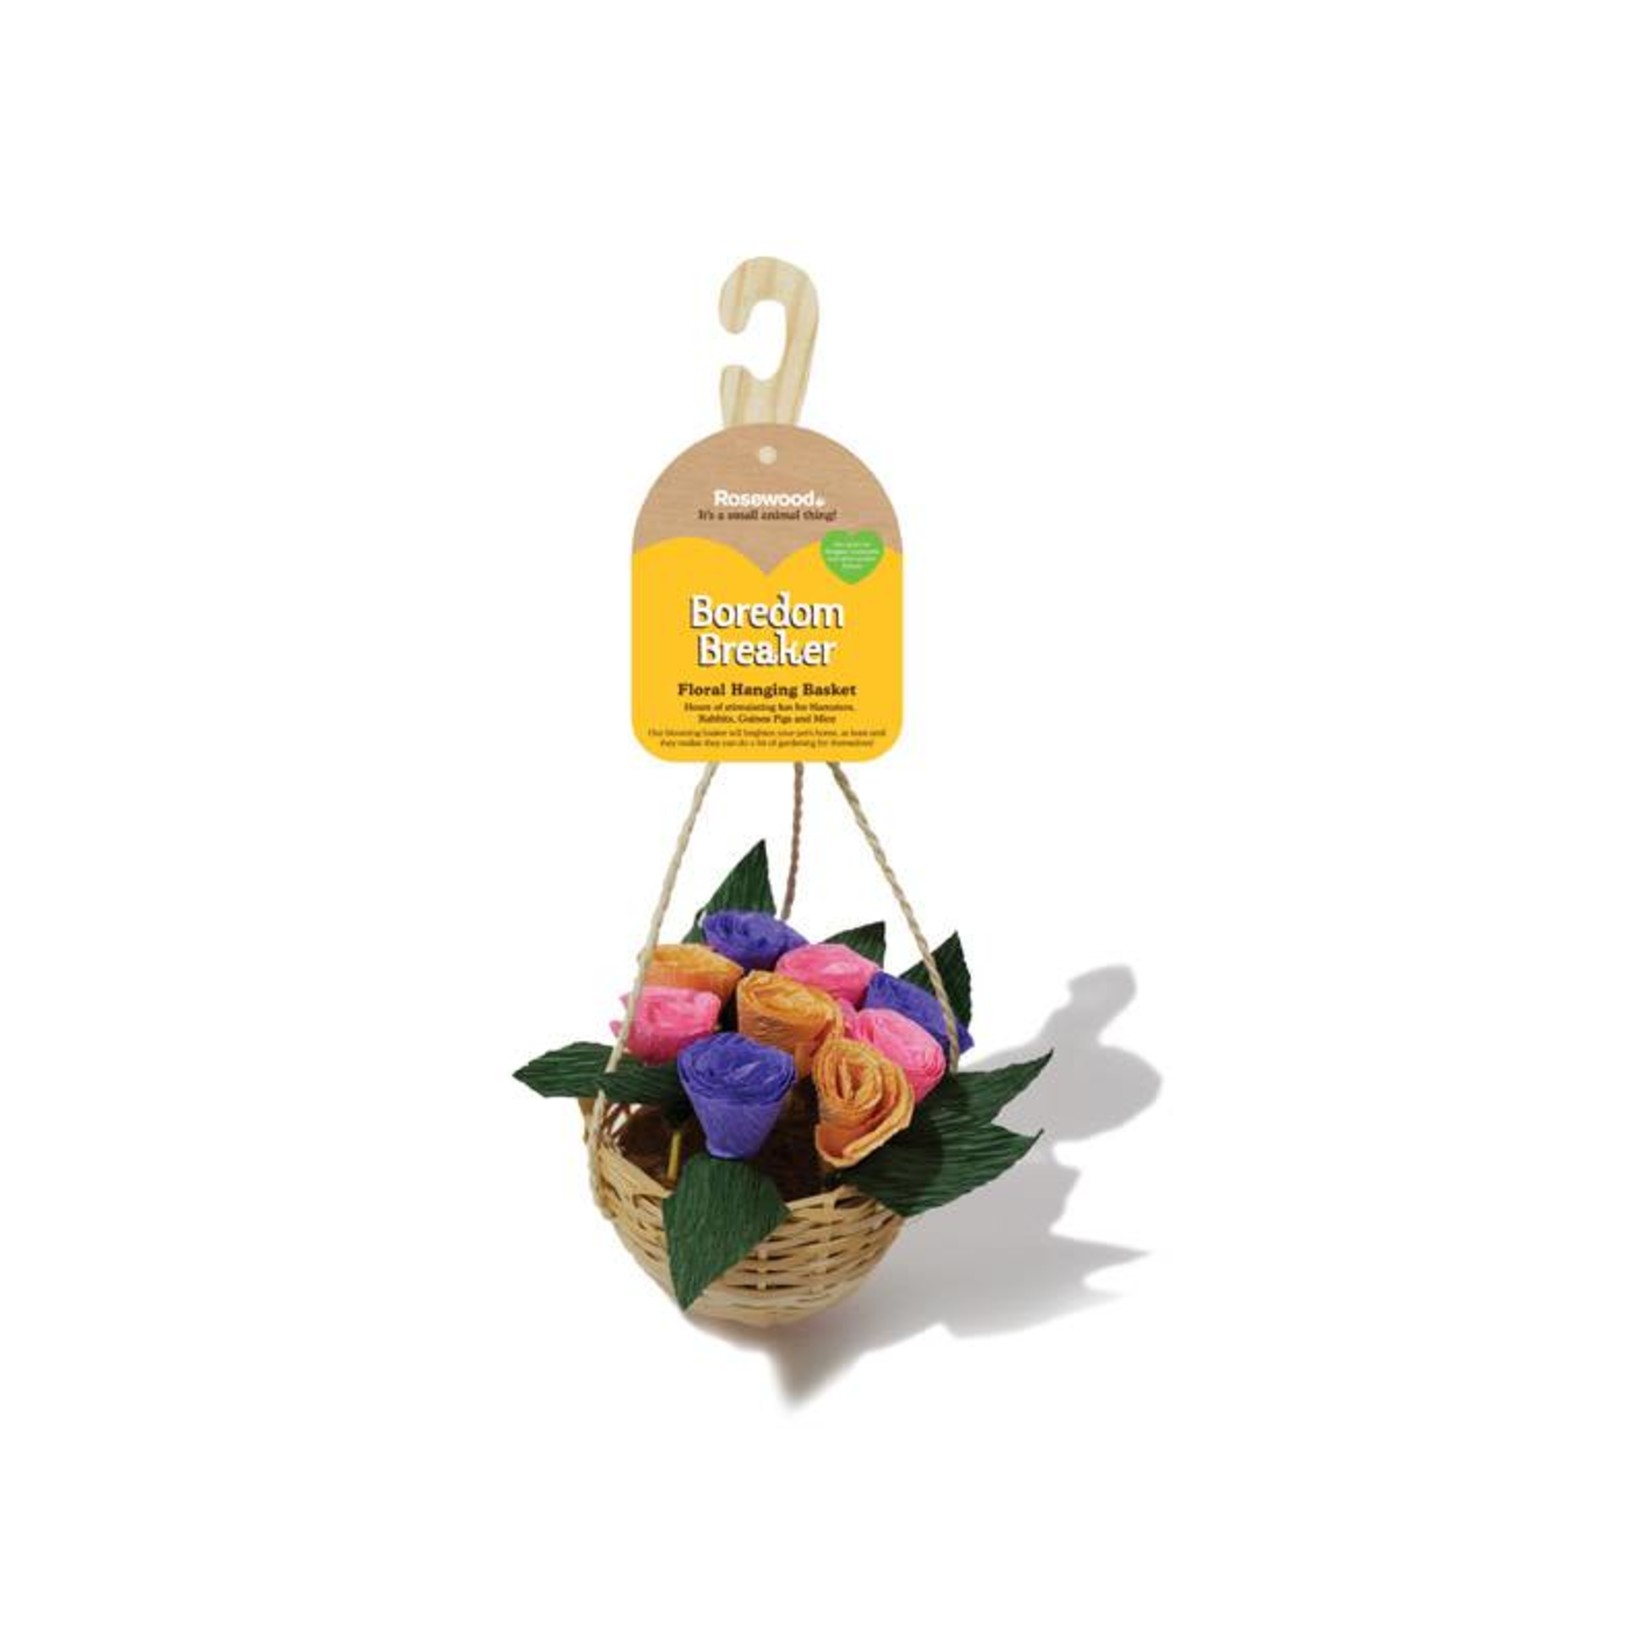 Rosewood Boredom Breaker Floral Hanging Basket Small Animal Treat Toy